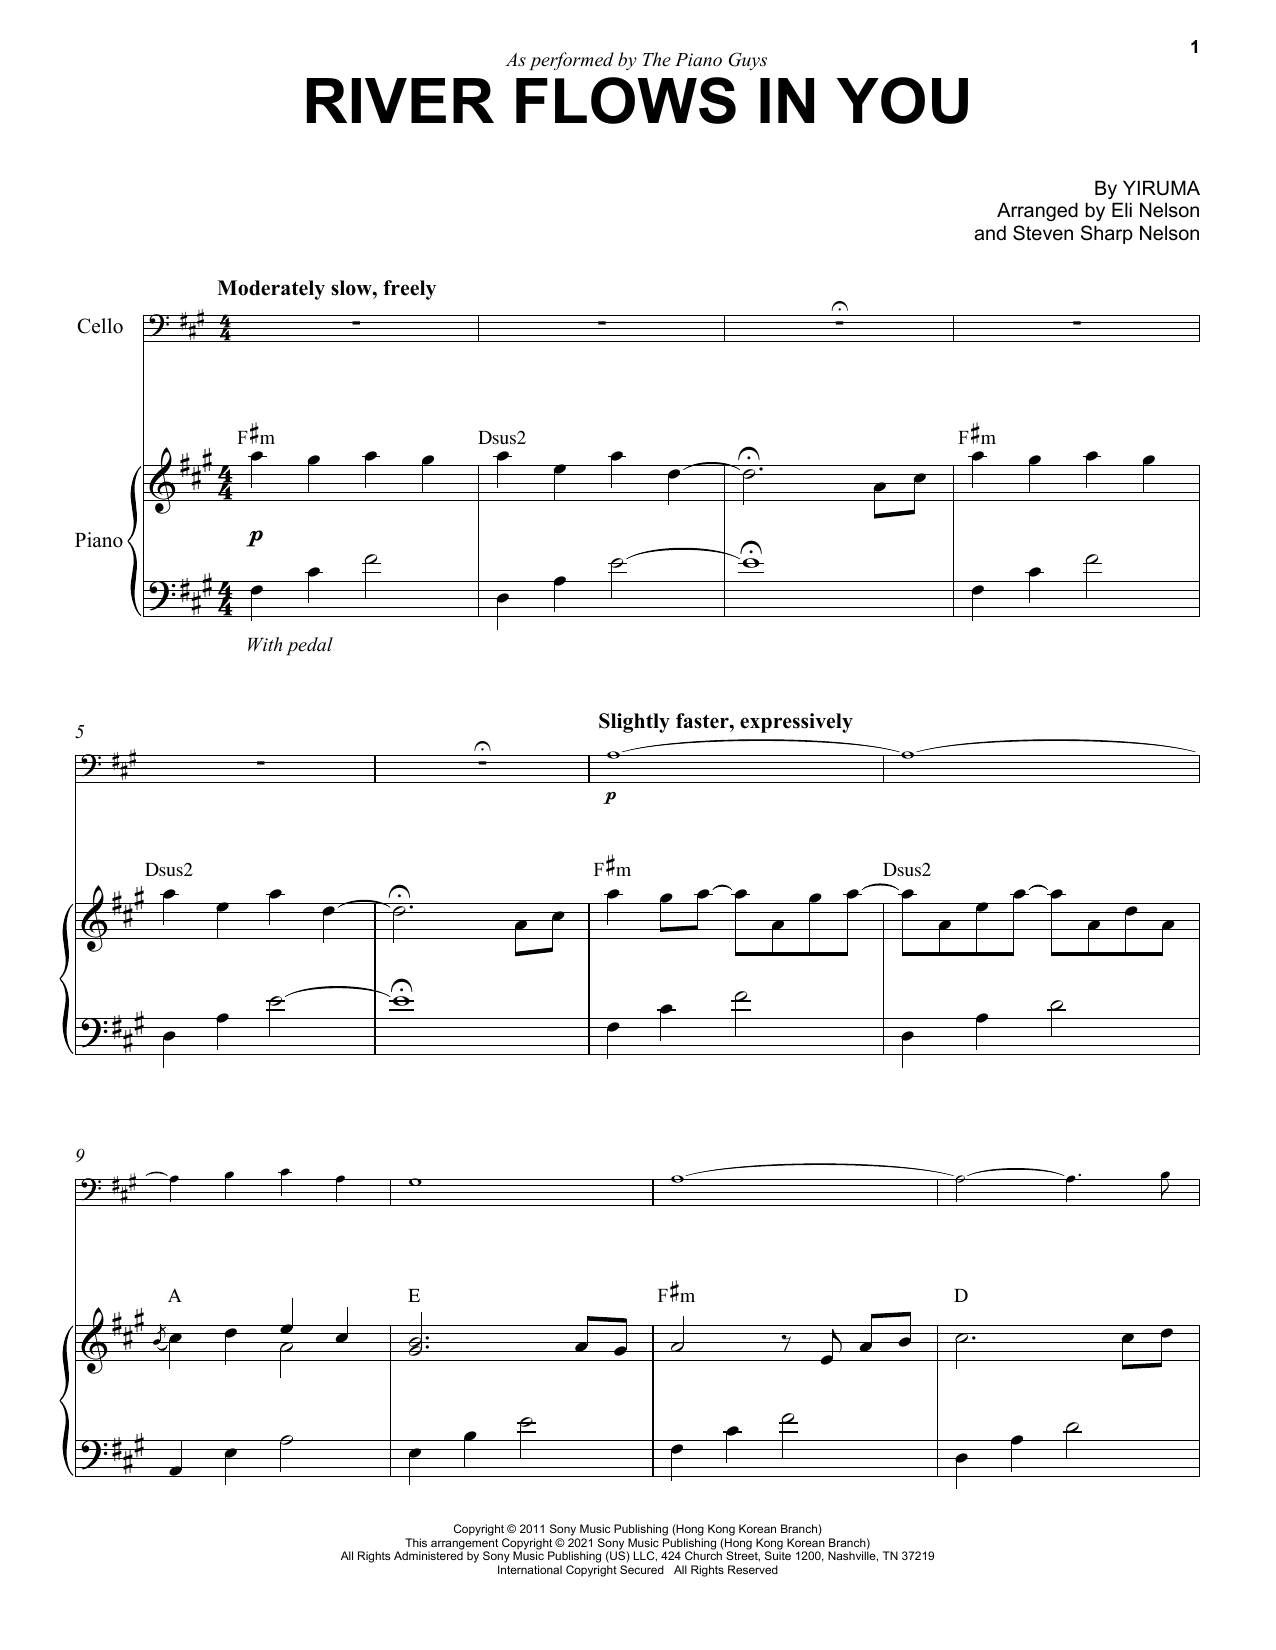 Download The Piano Guys River Flows In You Sheet Music